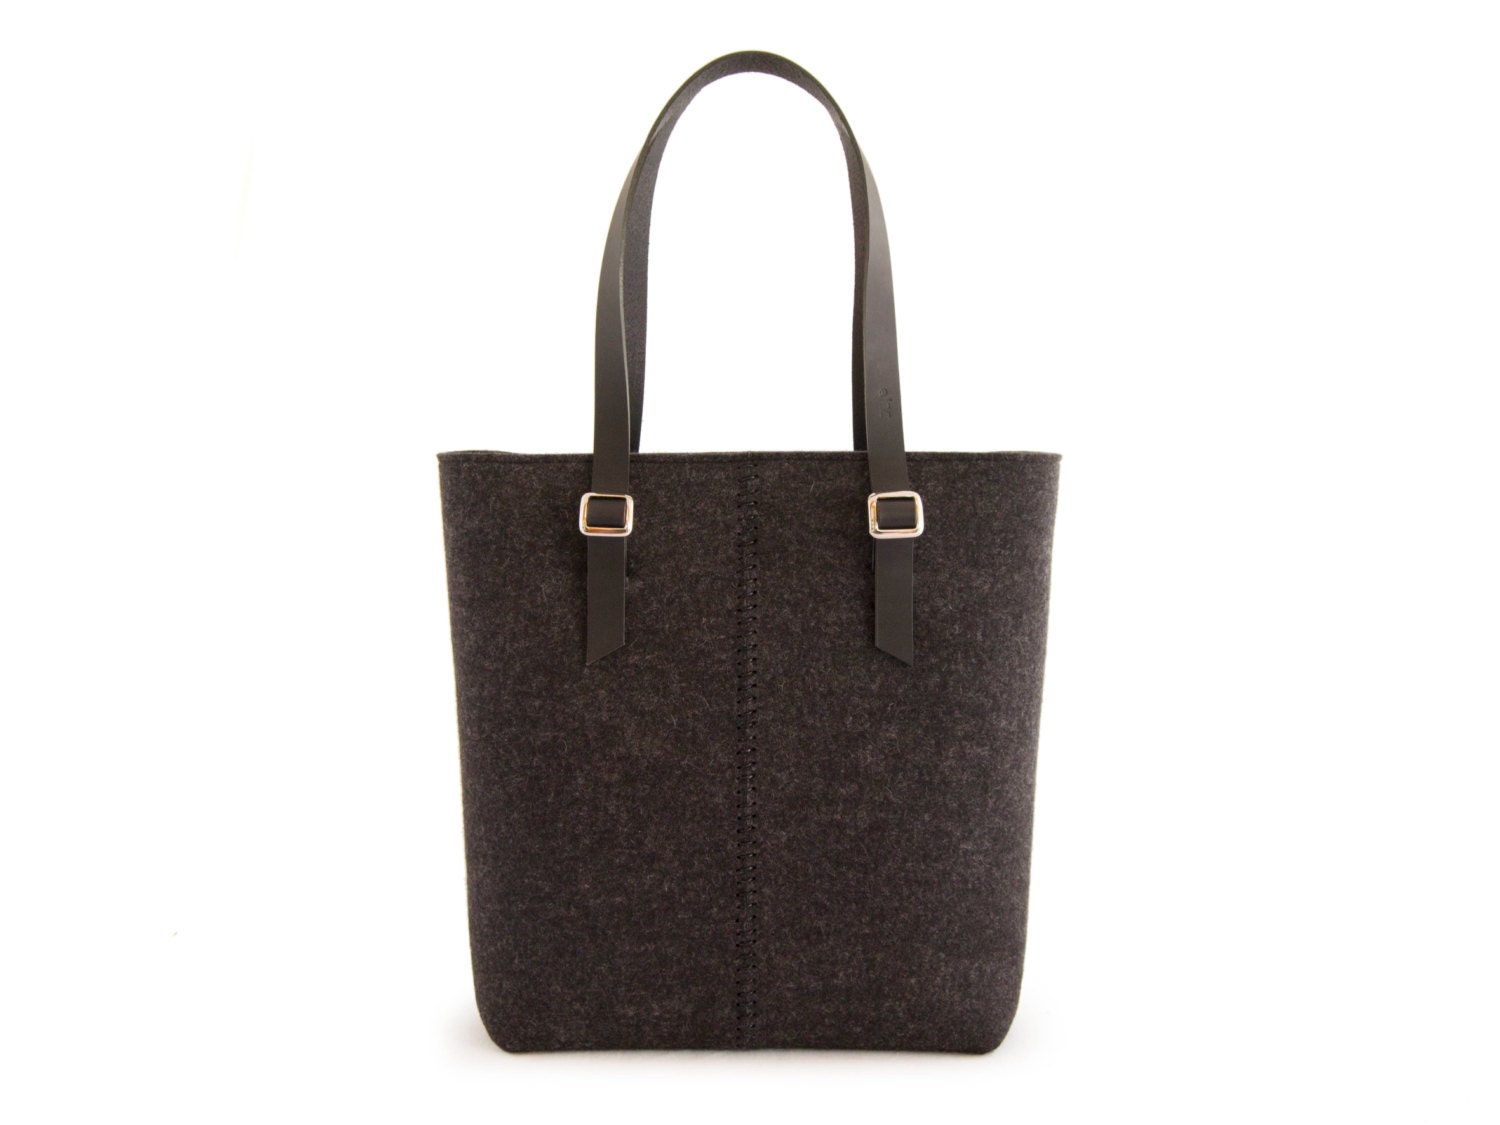 Wool felt TOTE BAG with leather straps - charcoal - made in Italy